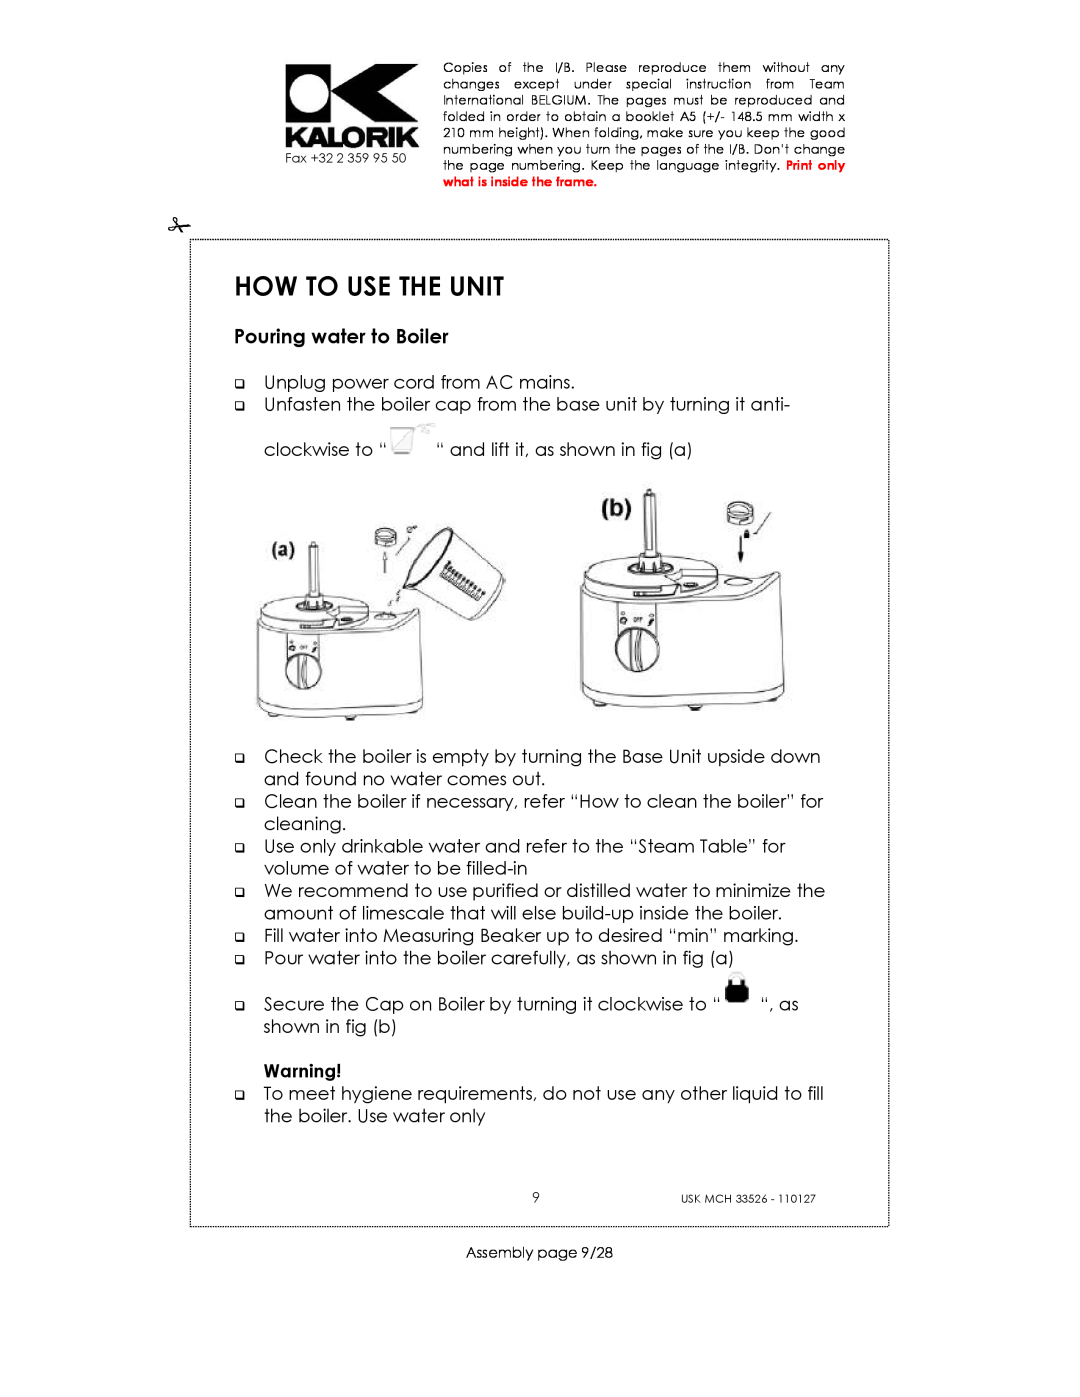 Kalorik USK MCH 33526 manual How To Use The Unit, Pouring water to Boiler 